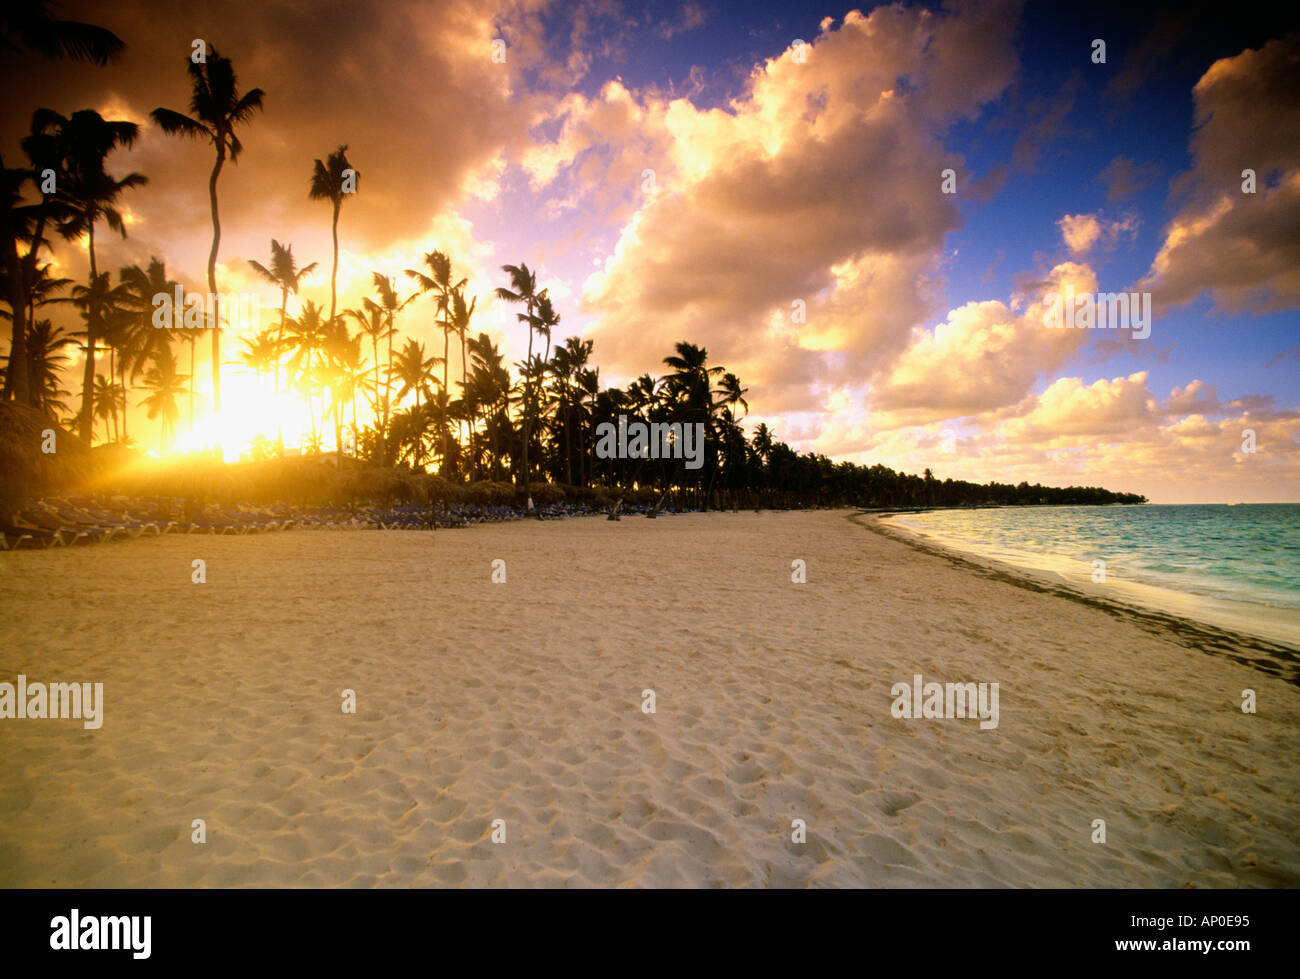 Palm trees are silhouetted by the setting sun in a colorful sky a beach Punta Cana Domincan Republic Stock Photo